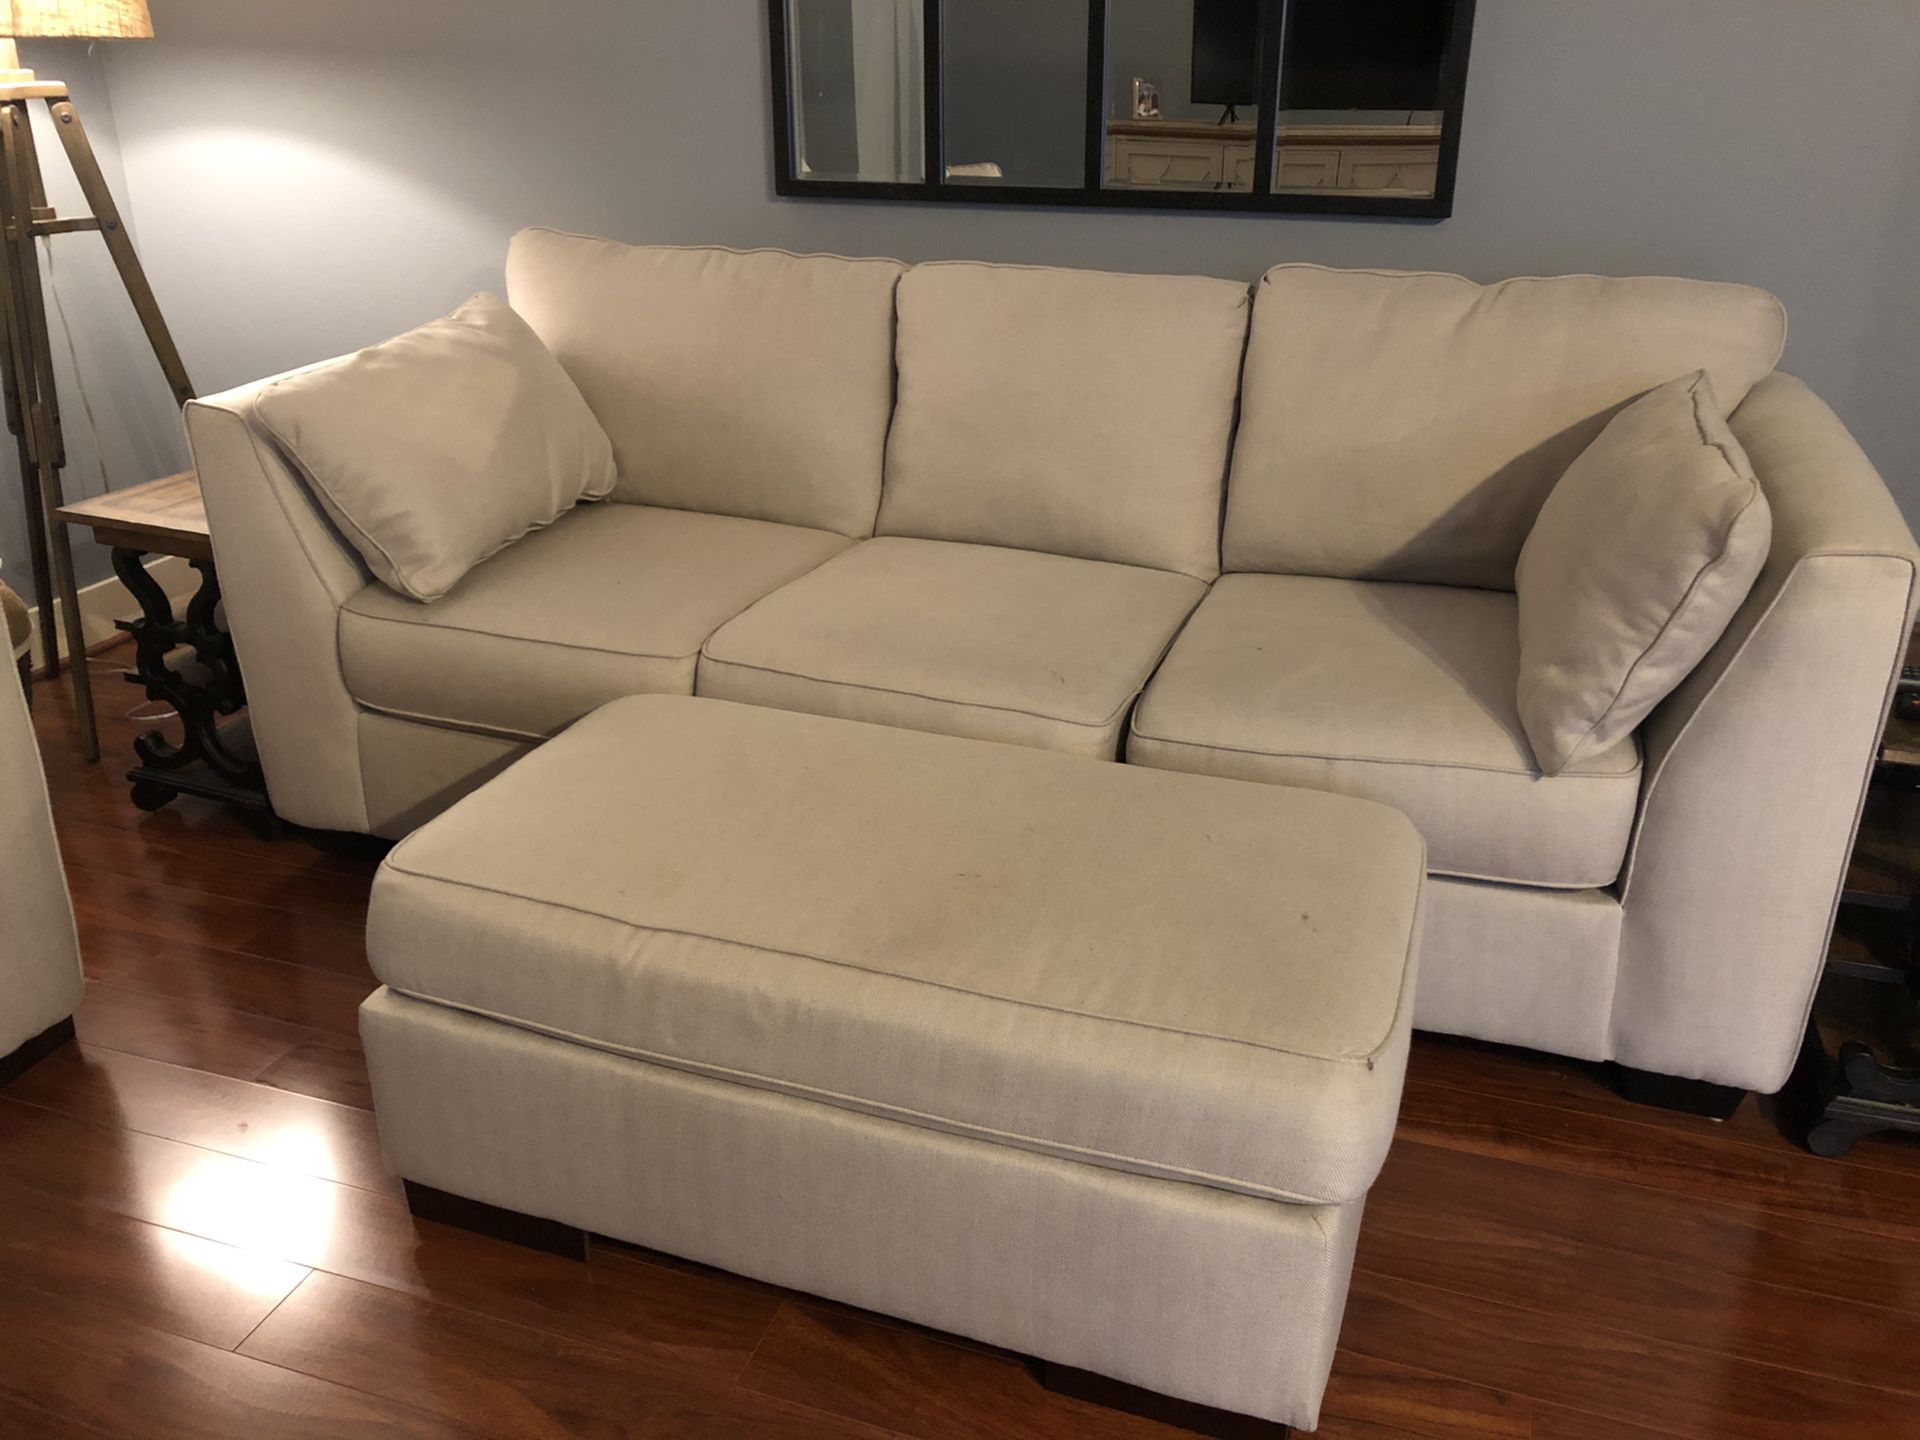 Free couch, ottoman, and chair!